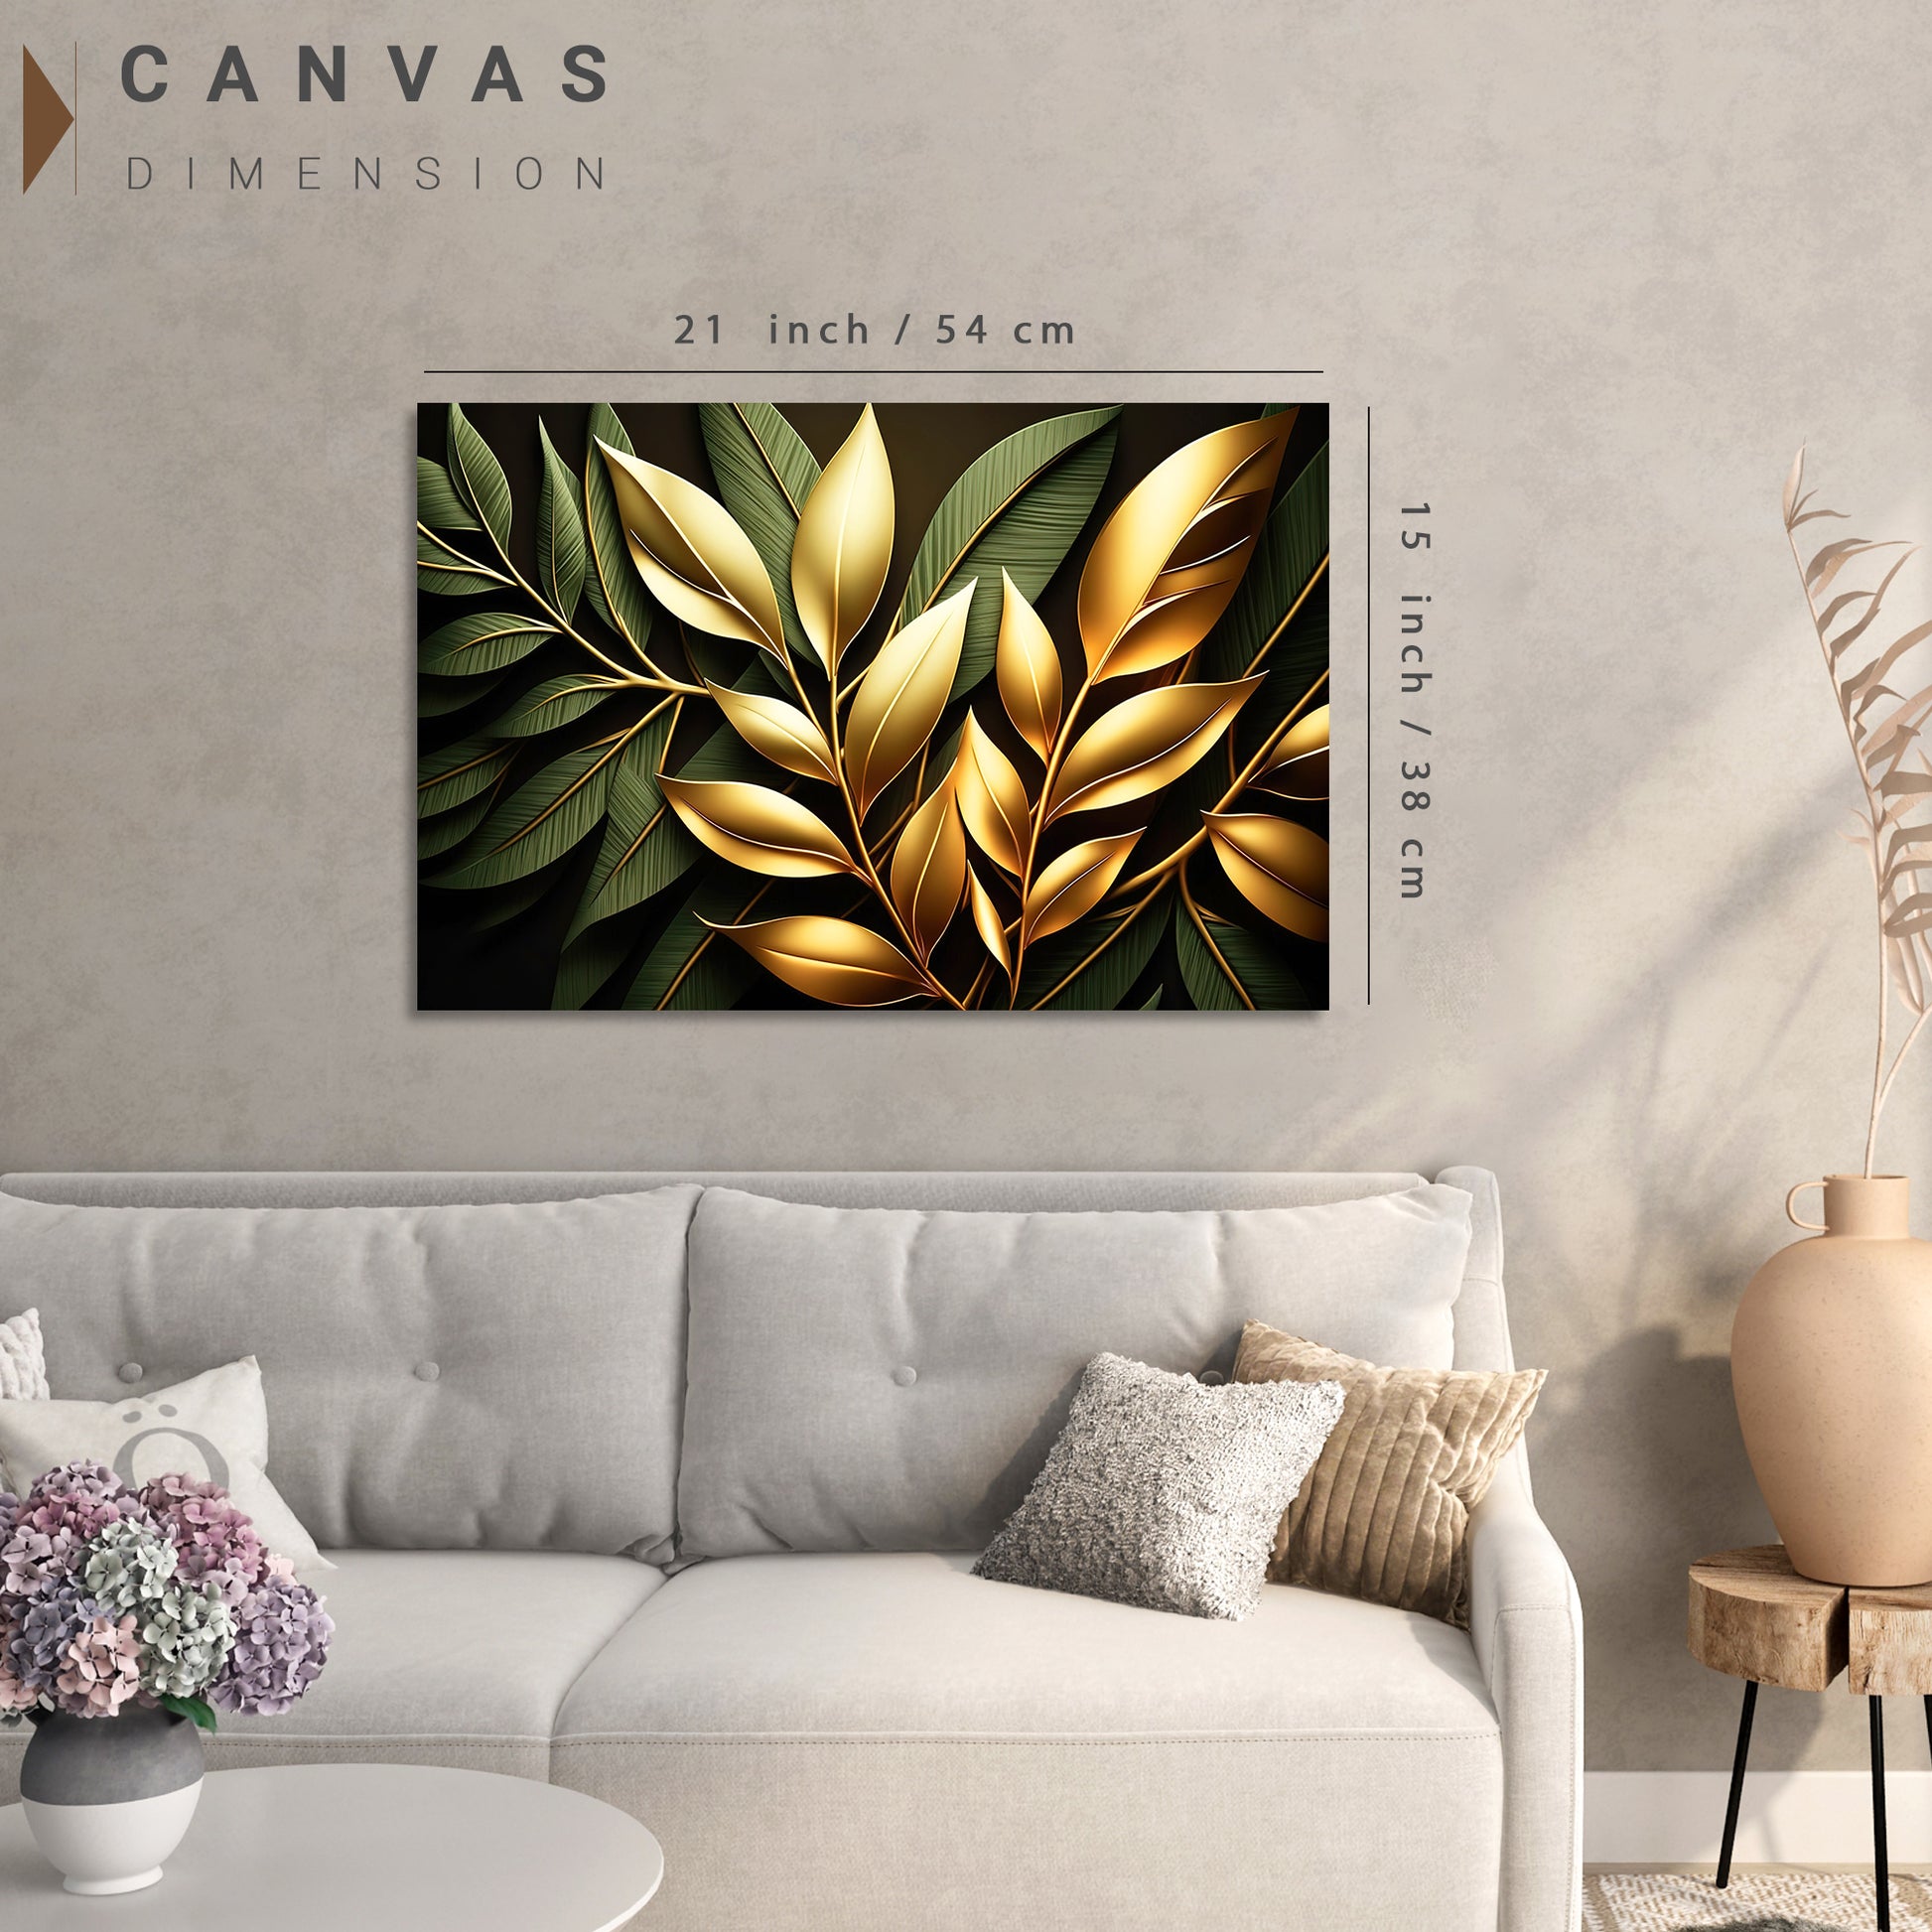 Canvas Paintings for Living Room: Abstract Wall Decor - Abstract Leaf Art Canvas Paintings-Kotart